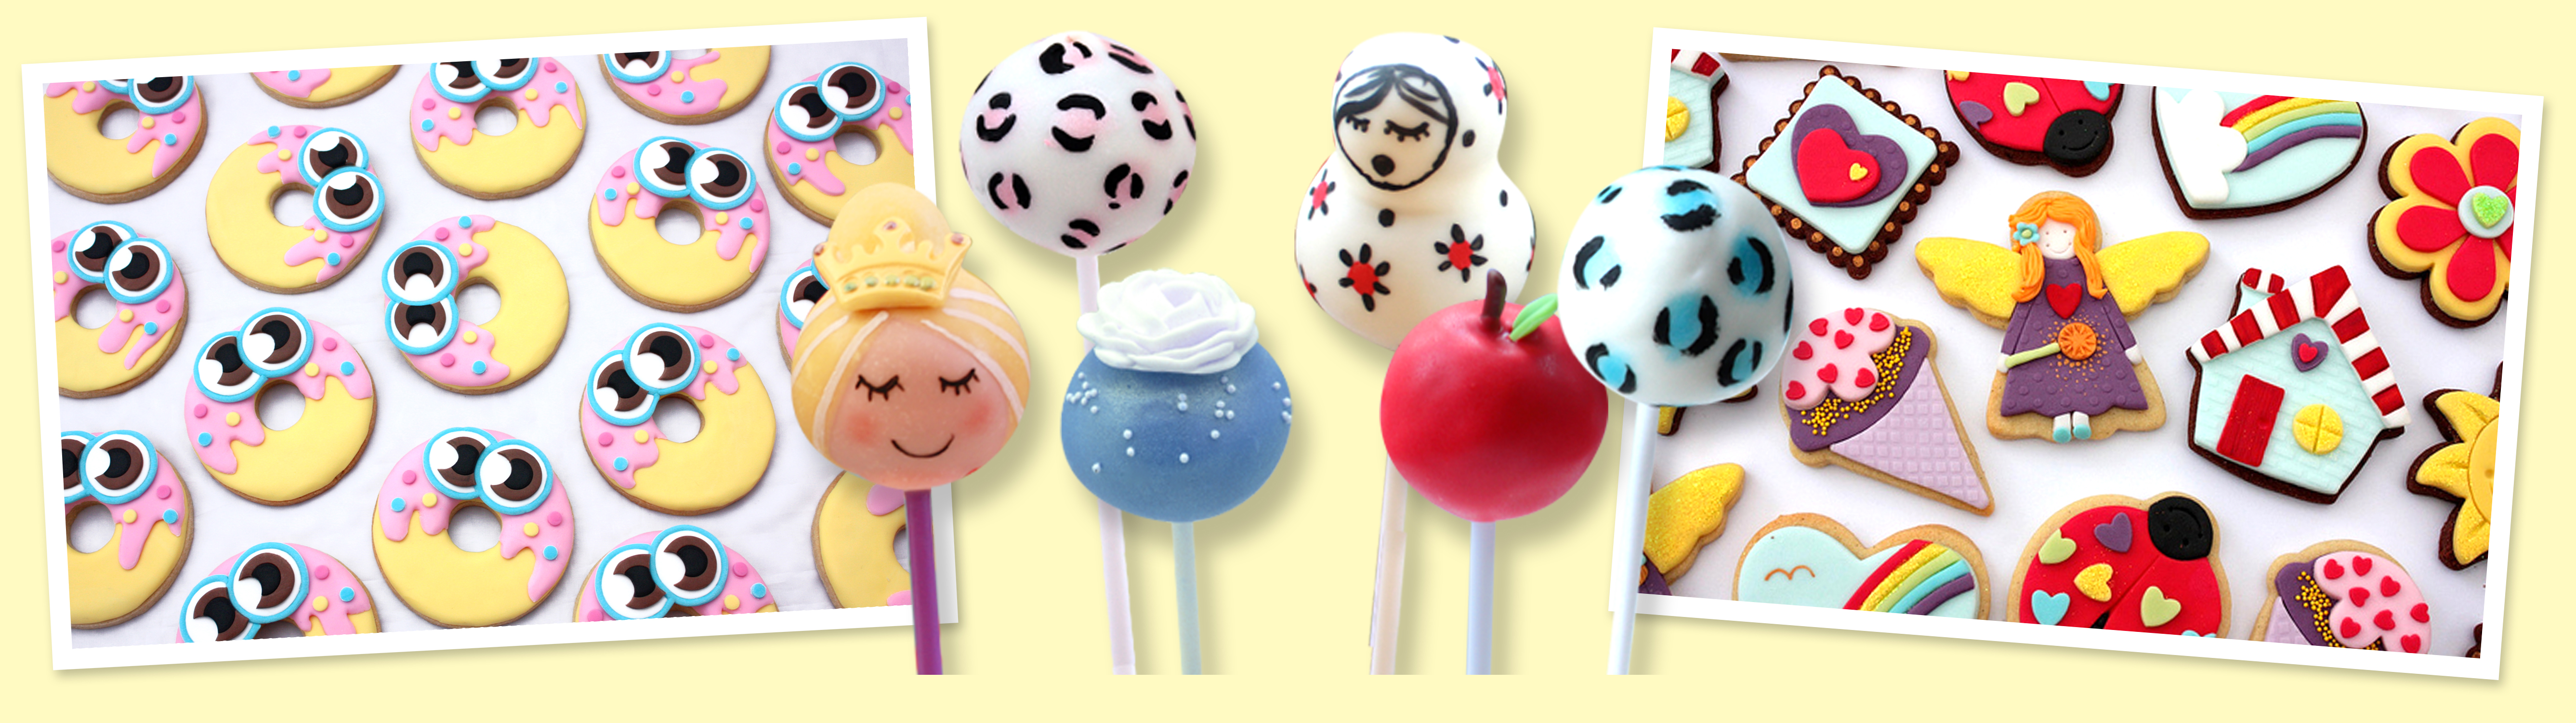 Cake Pops, Norfolk, Cookies, Iced, Biscuits, Royal Iced, Flood iced, norwich, nationwide delivery, wedding cake norfolk,